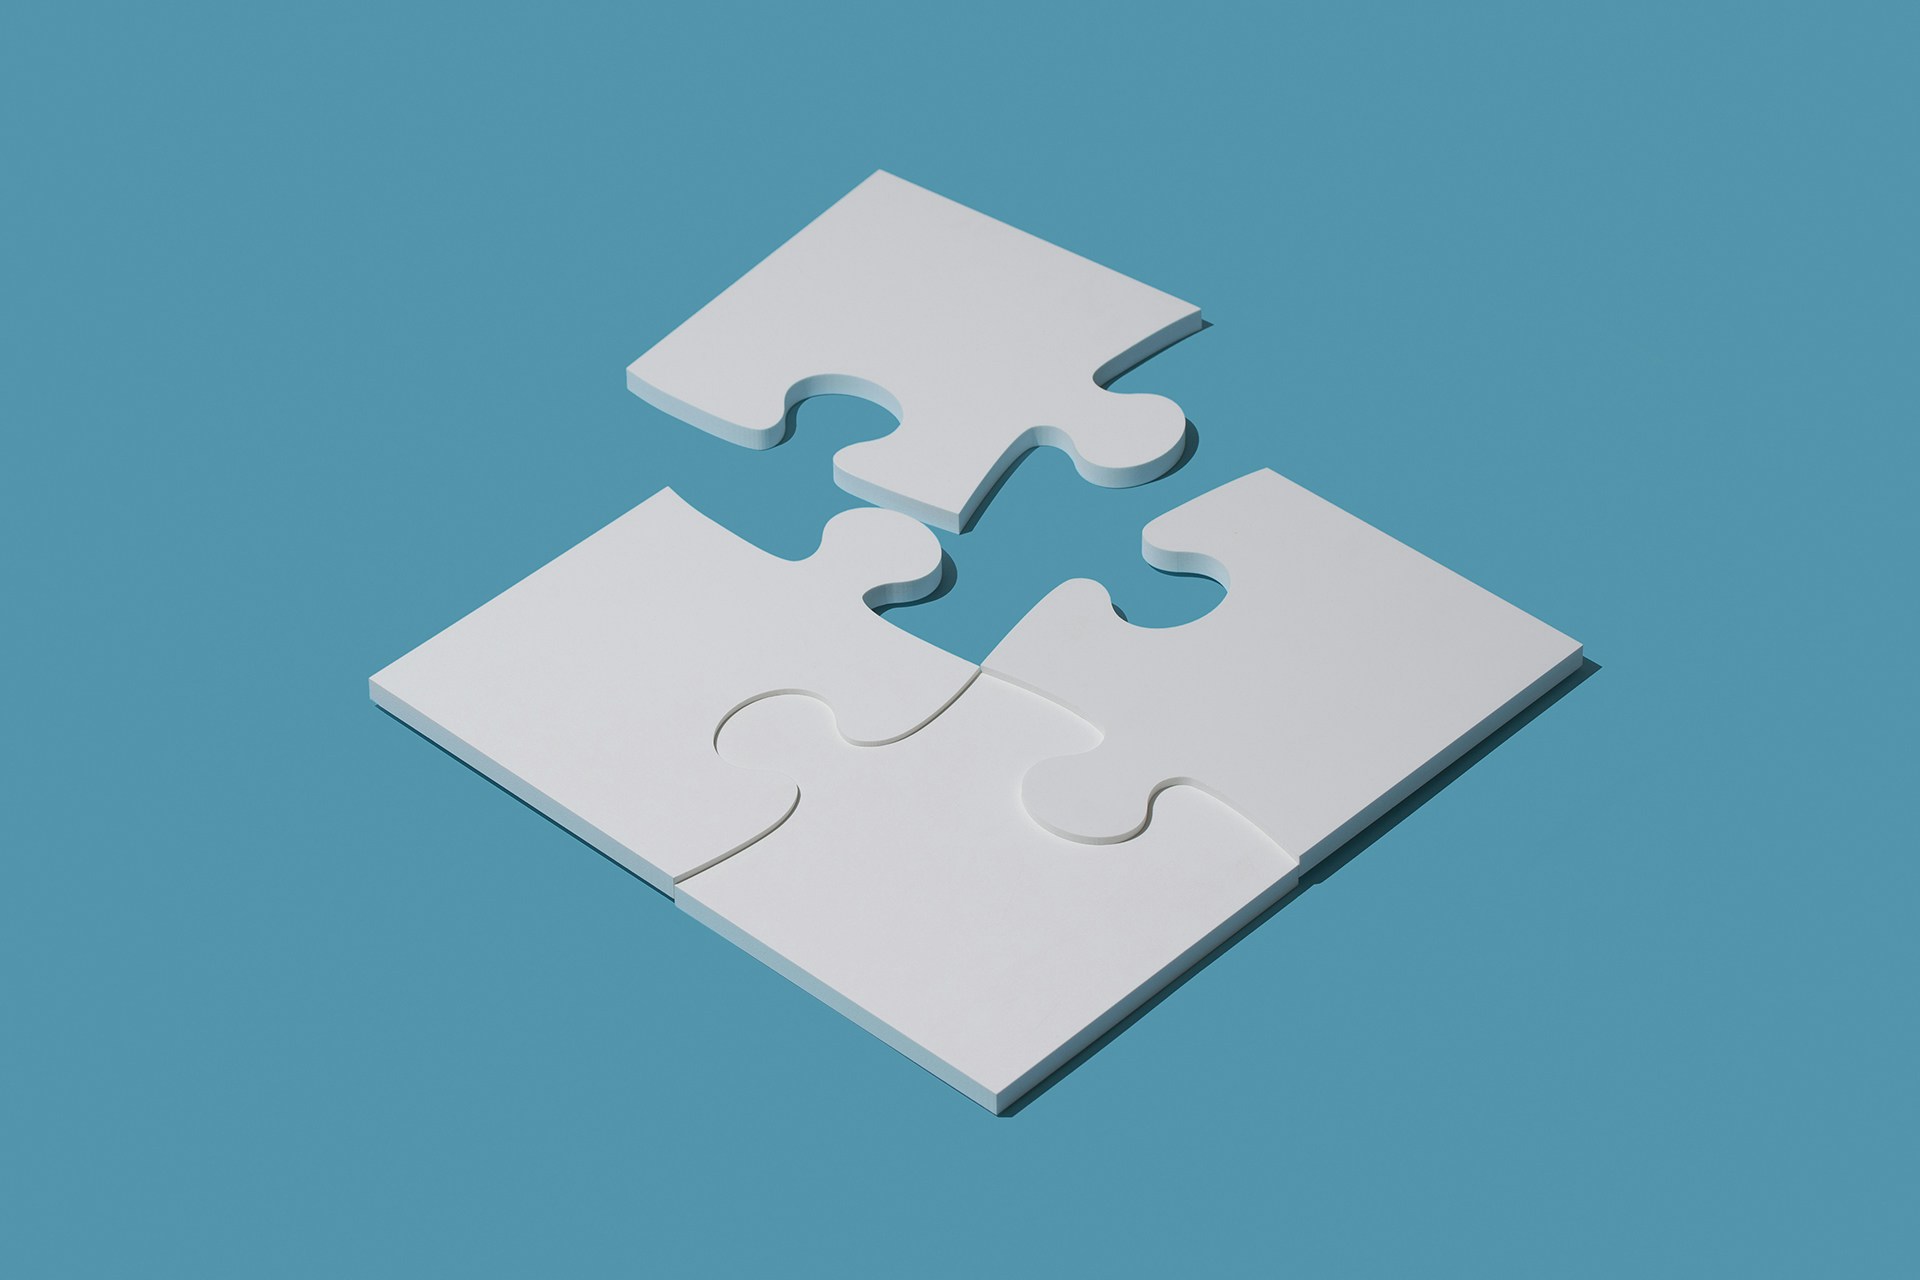 A 4-piece puzzle in the shape of a square with one corner not yet connected on a blue background. This image is being used a thumbnail for a blog onmarketing segementation